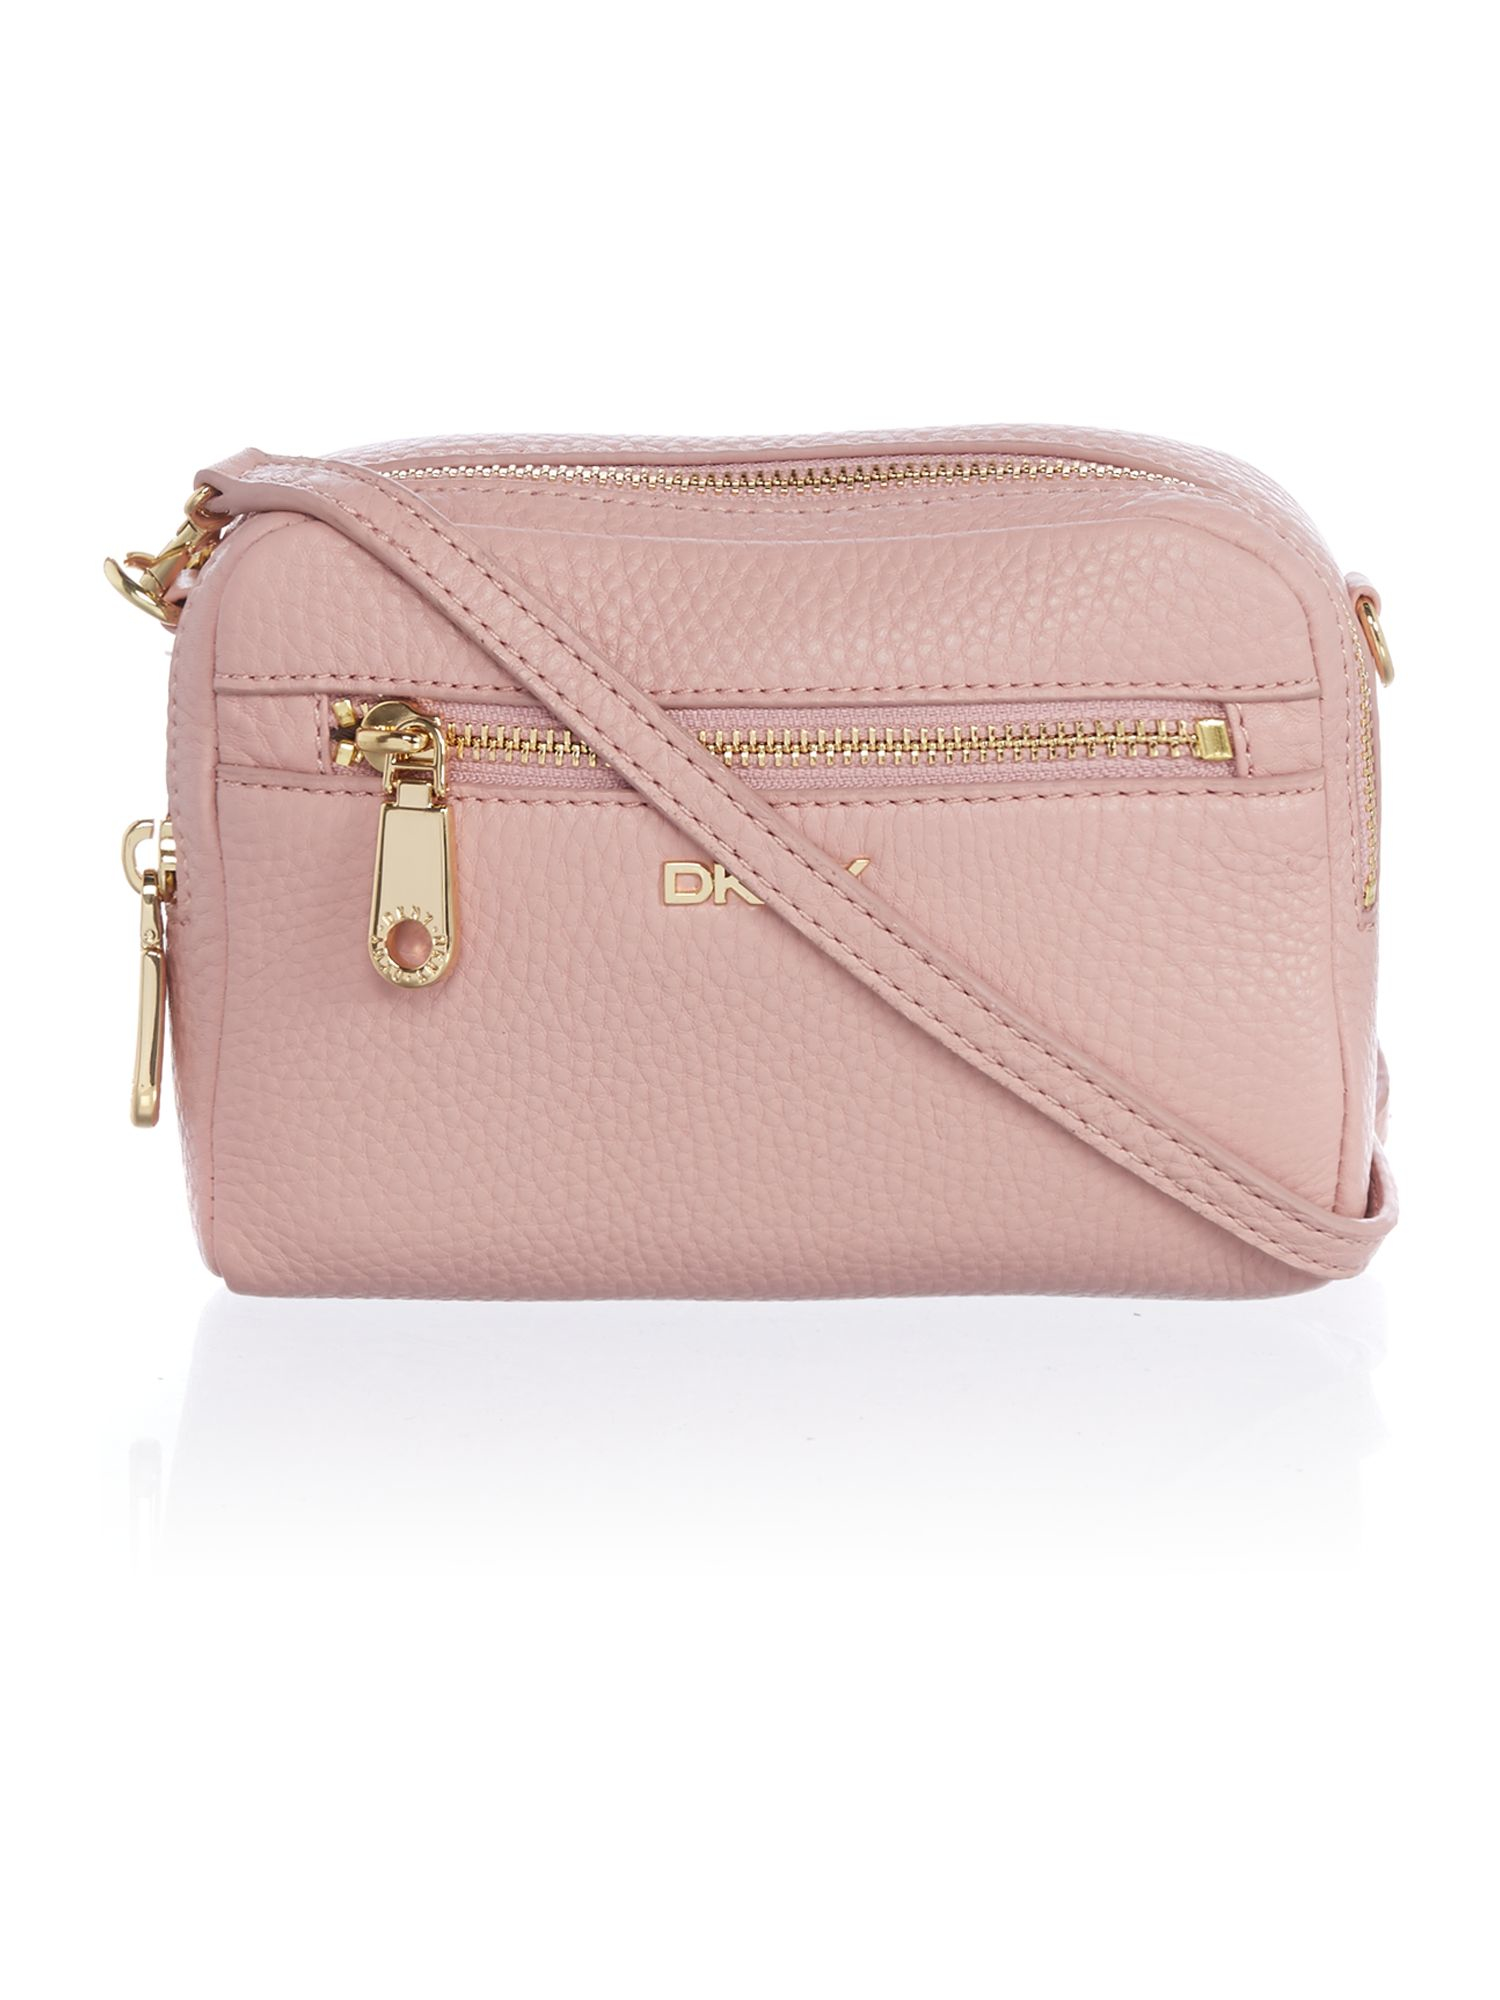 DKNY Leather Tribeca Light Pink Small Cross Body Bag - Lyst